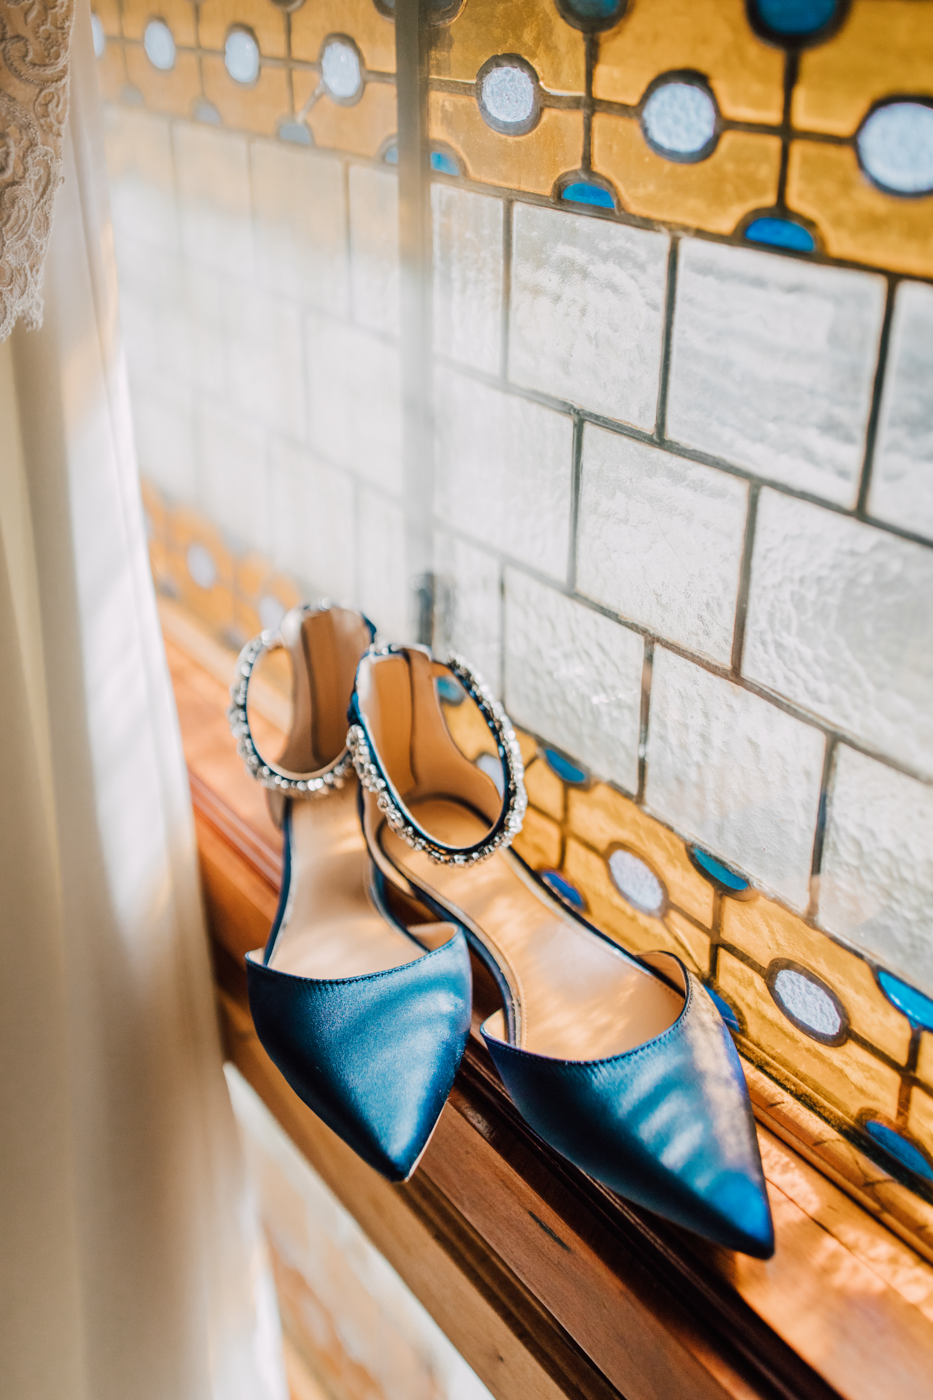  Blue wedding shoes sitting next to a stained glass window 